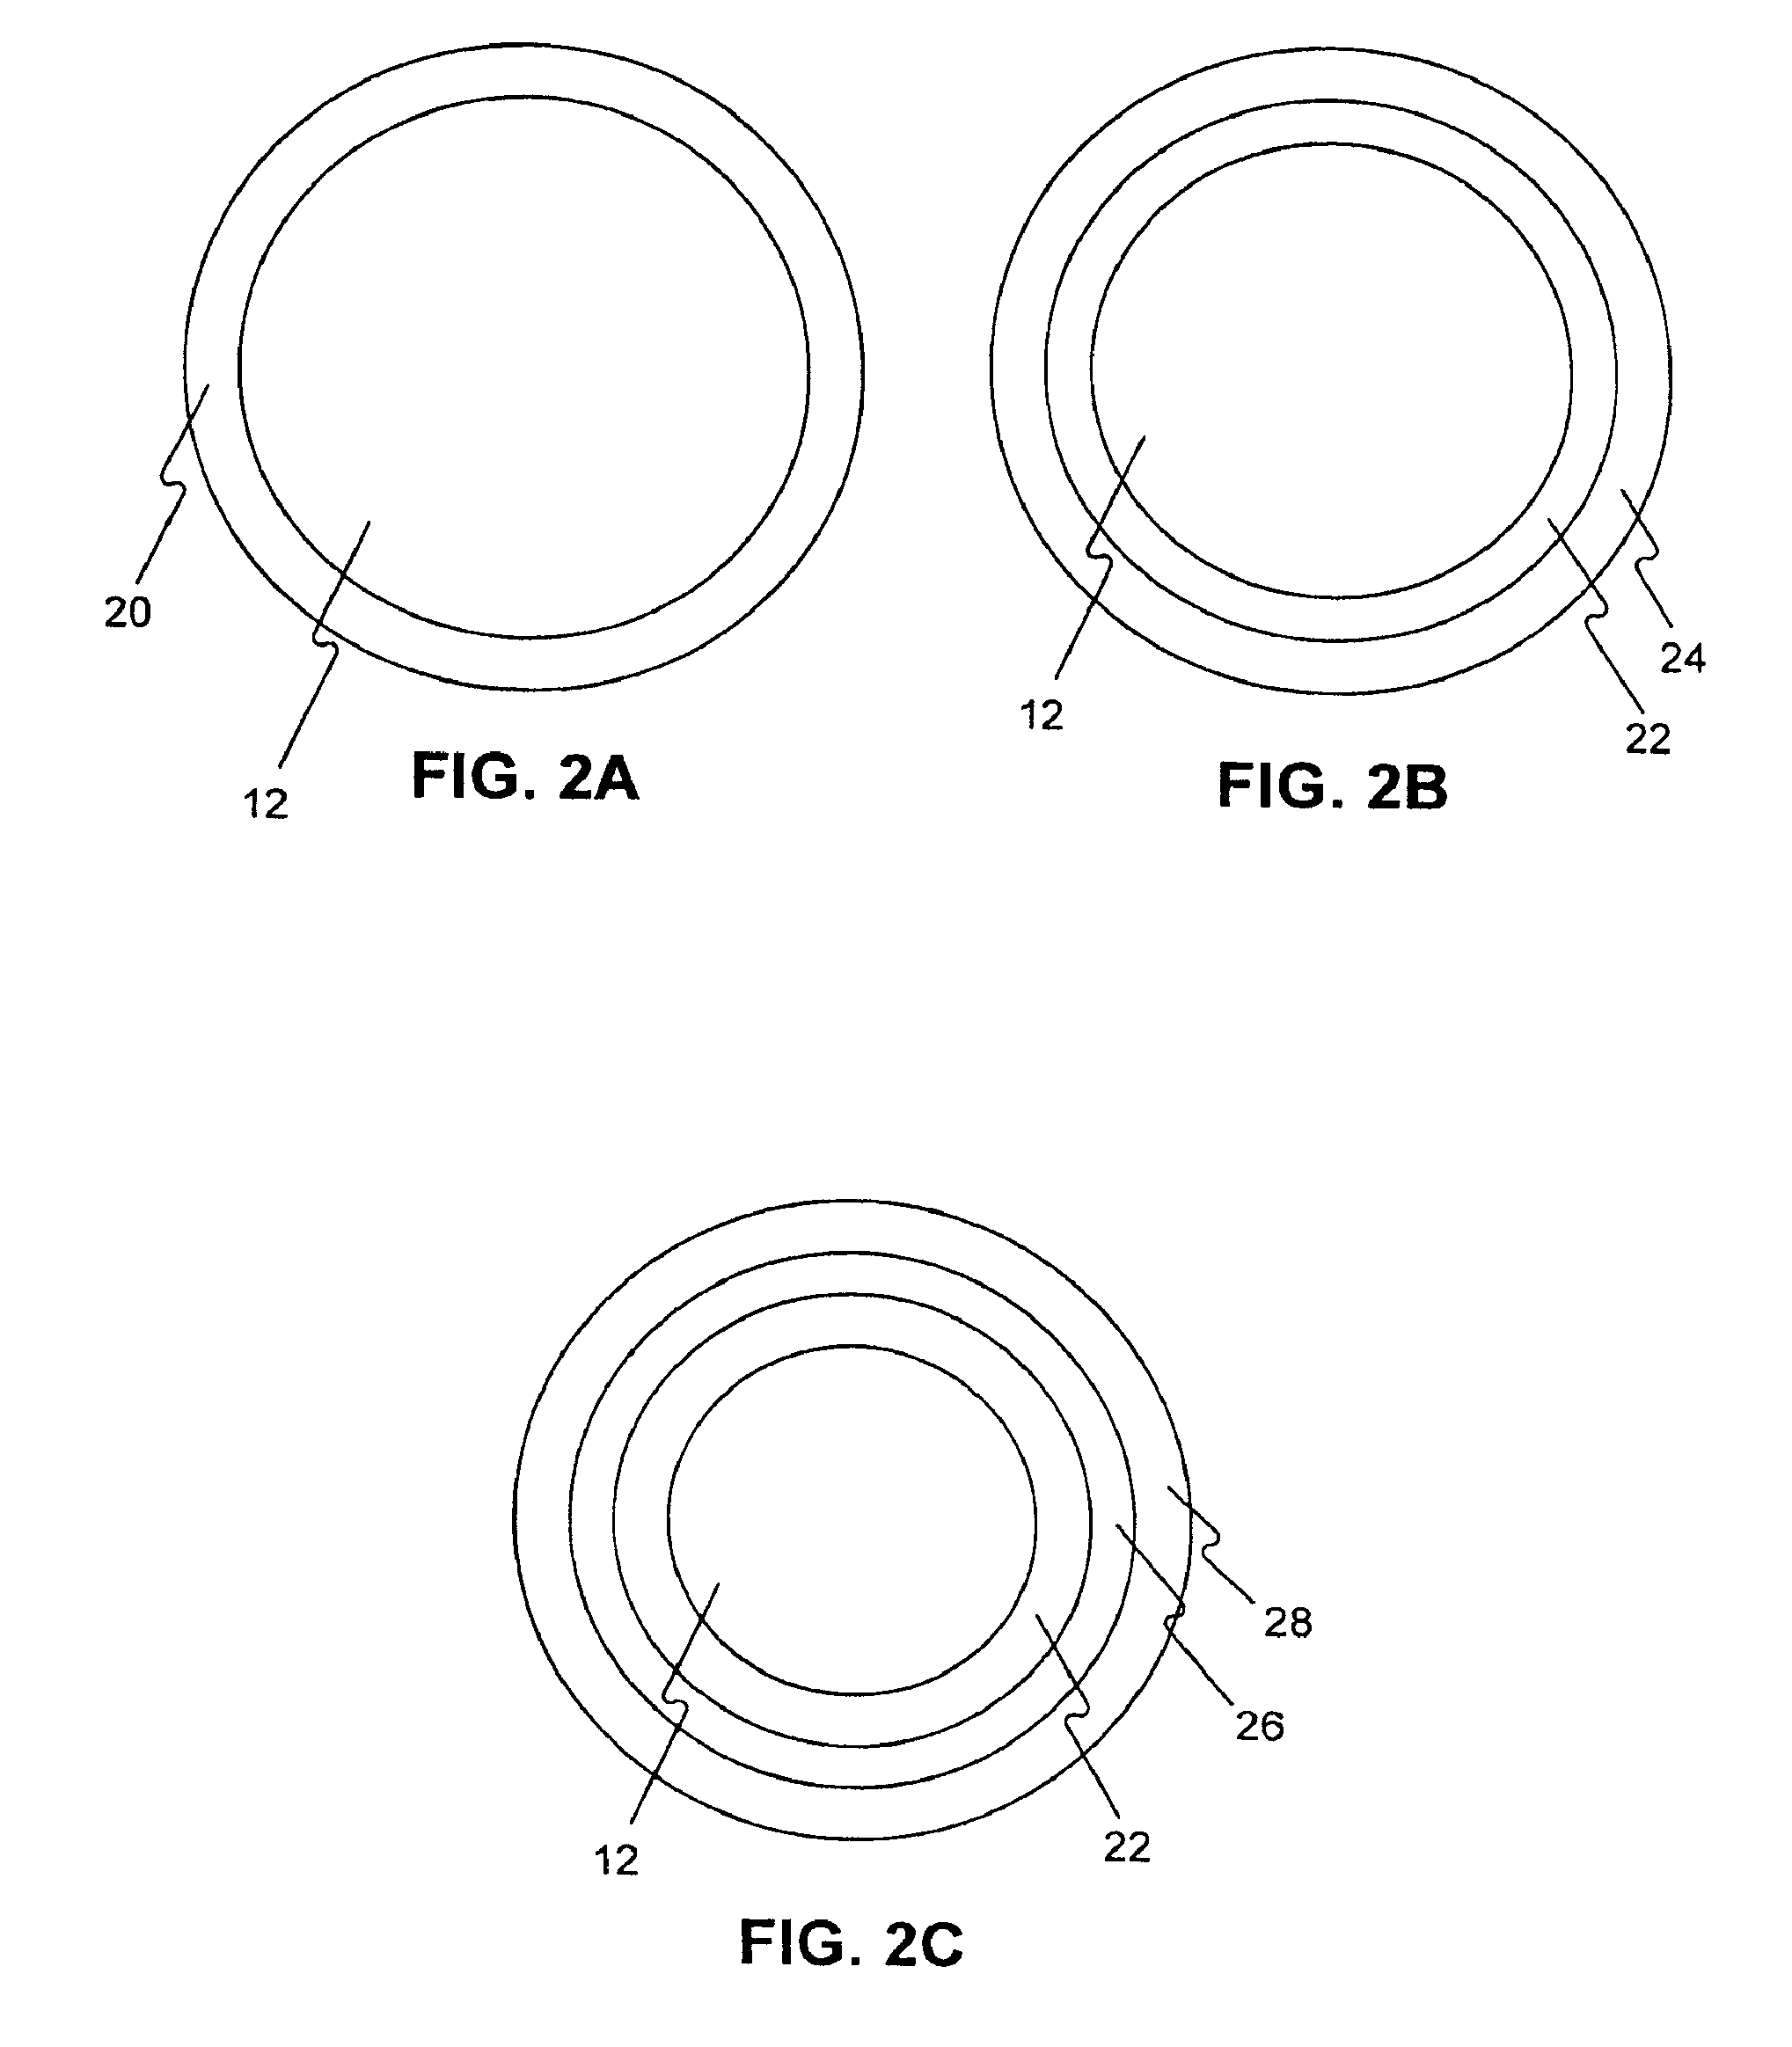 Medical device rapid drug releasing coatings comprising oils, fatty acids, and/or lipids